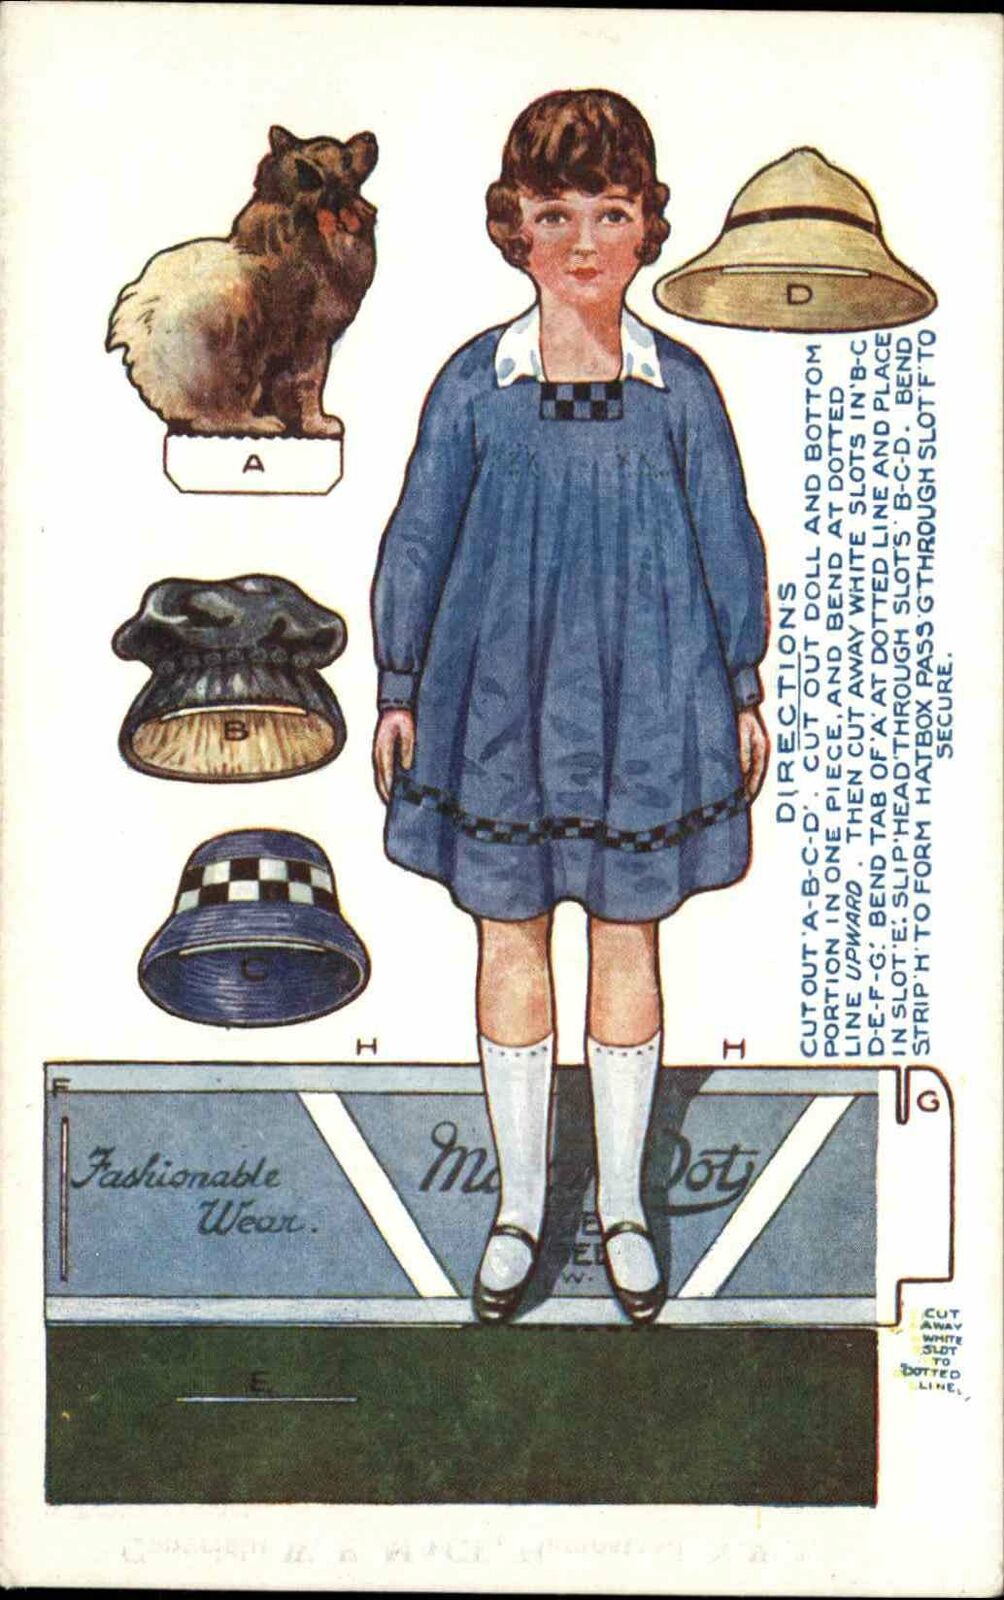 Paper Doll Cut Out Novelty Mechanical WE Mack Toy Town Series Postcard c1915